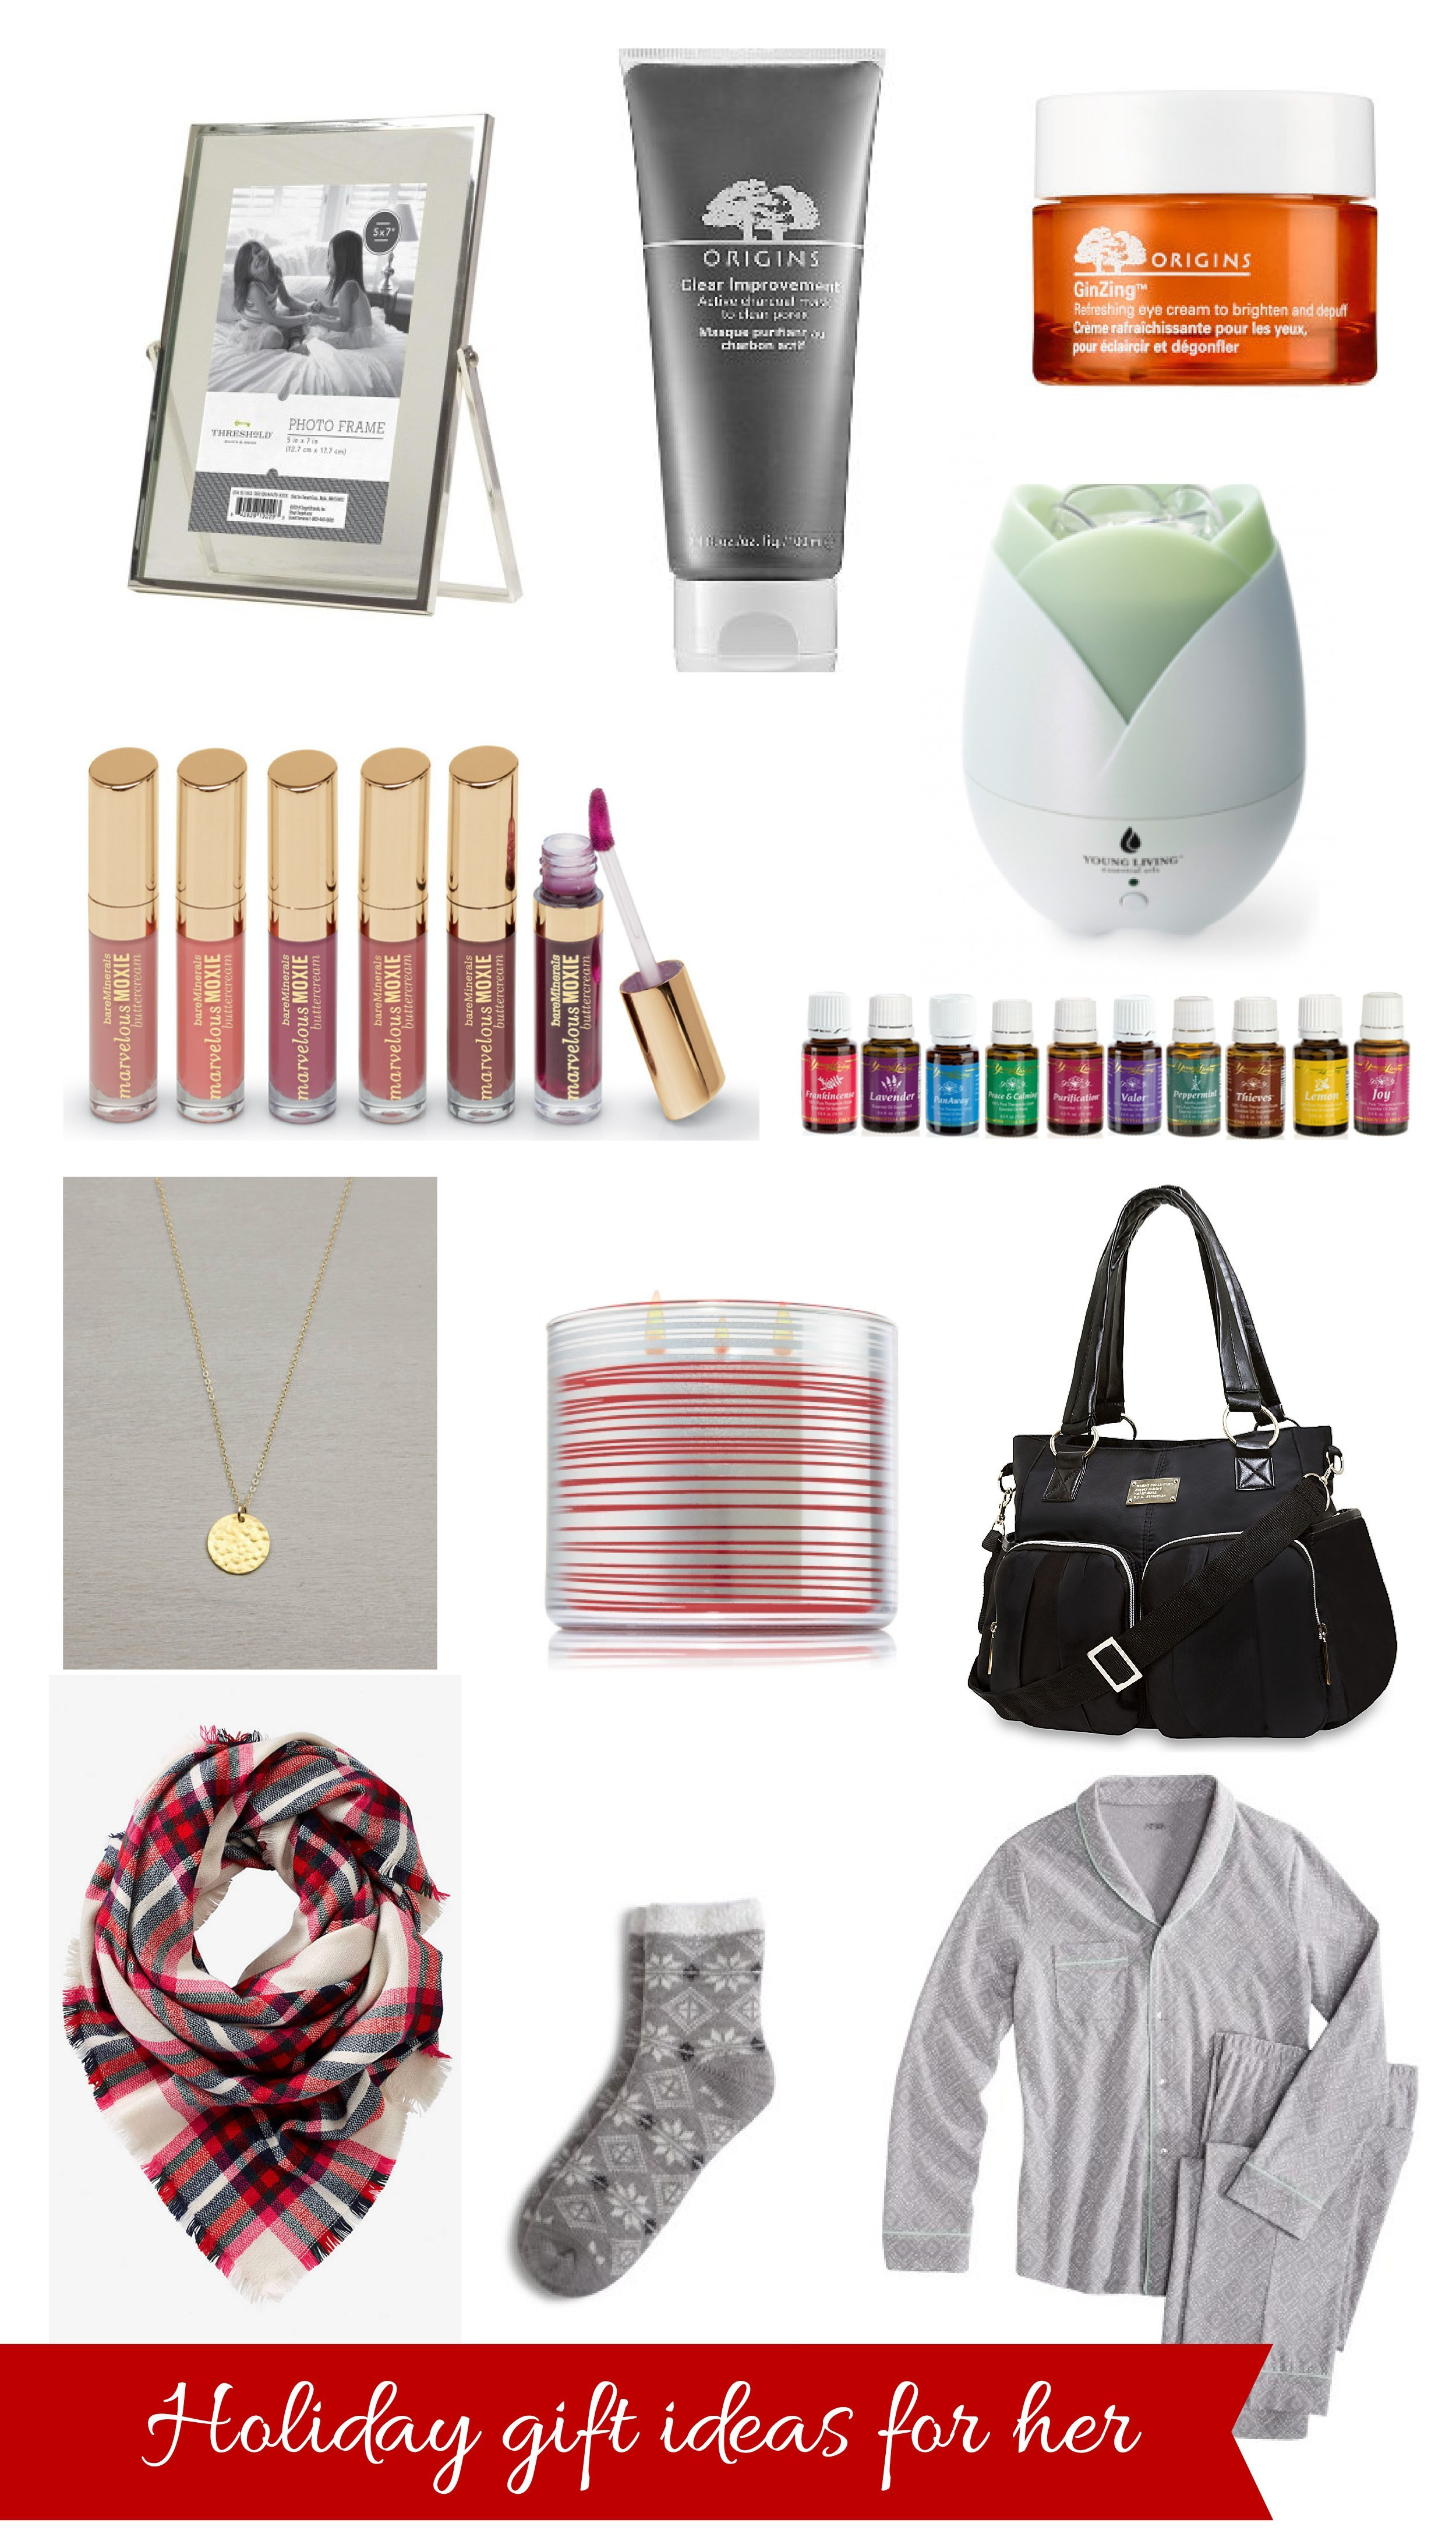 Christmas Gift Ideas For Her
 My Favorite Things Gift Ideas for Her Perpetually